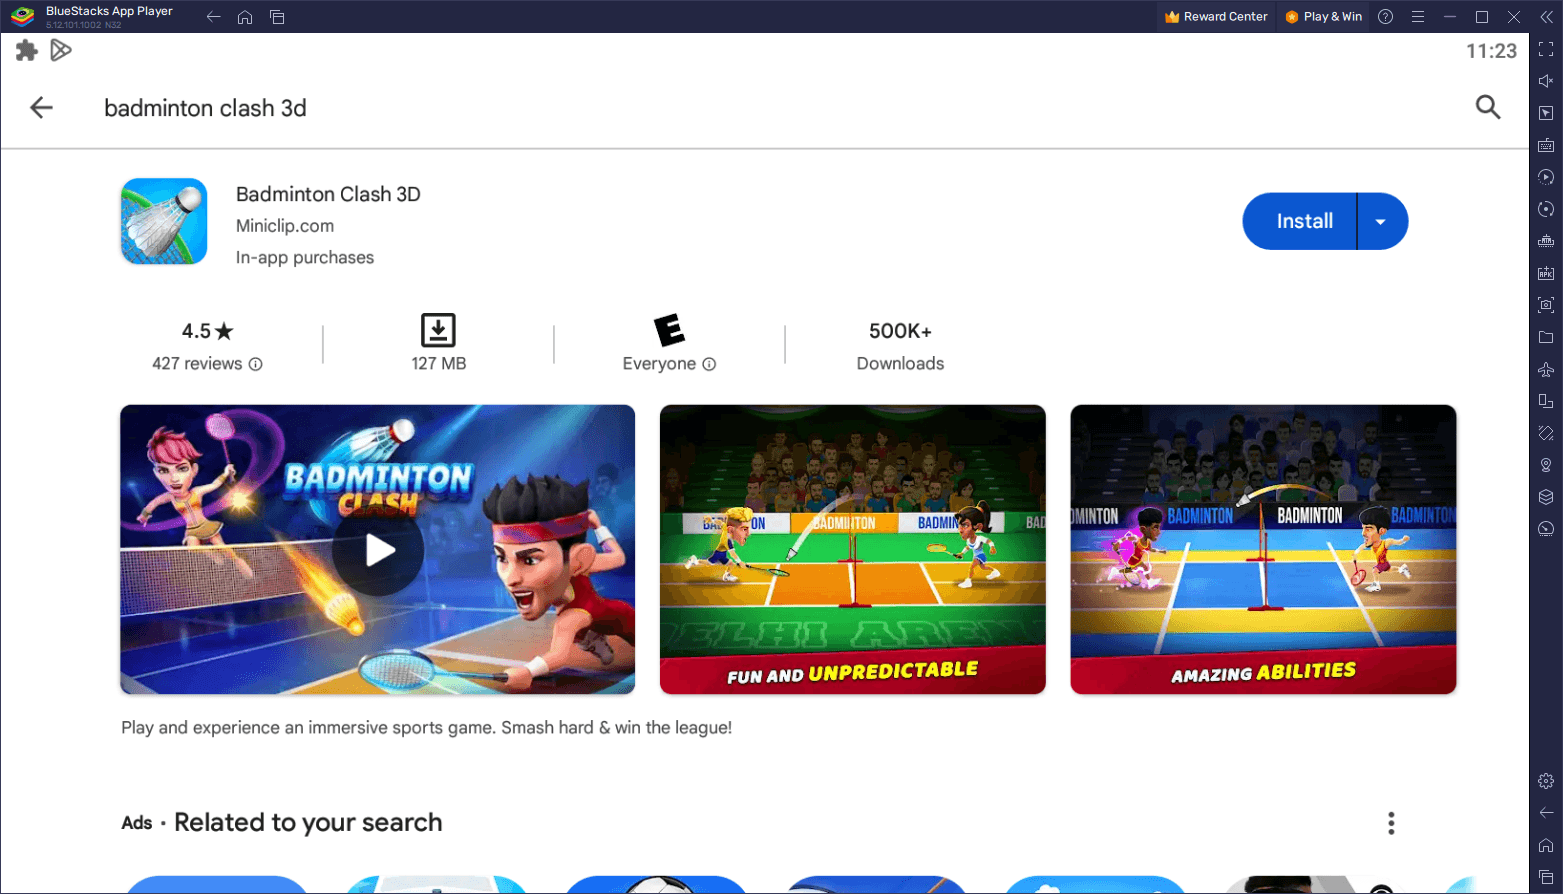 How to Play Badminton Clash 3D on PC With BlueStacks